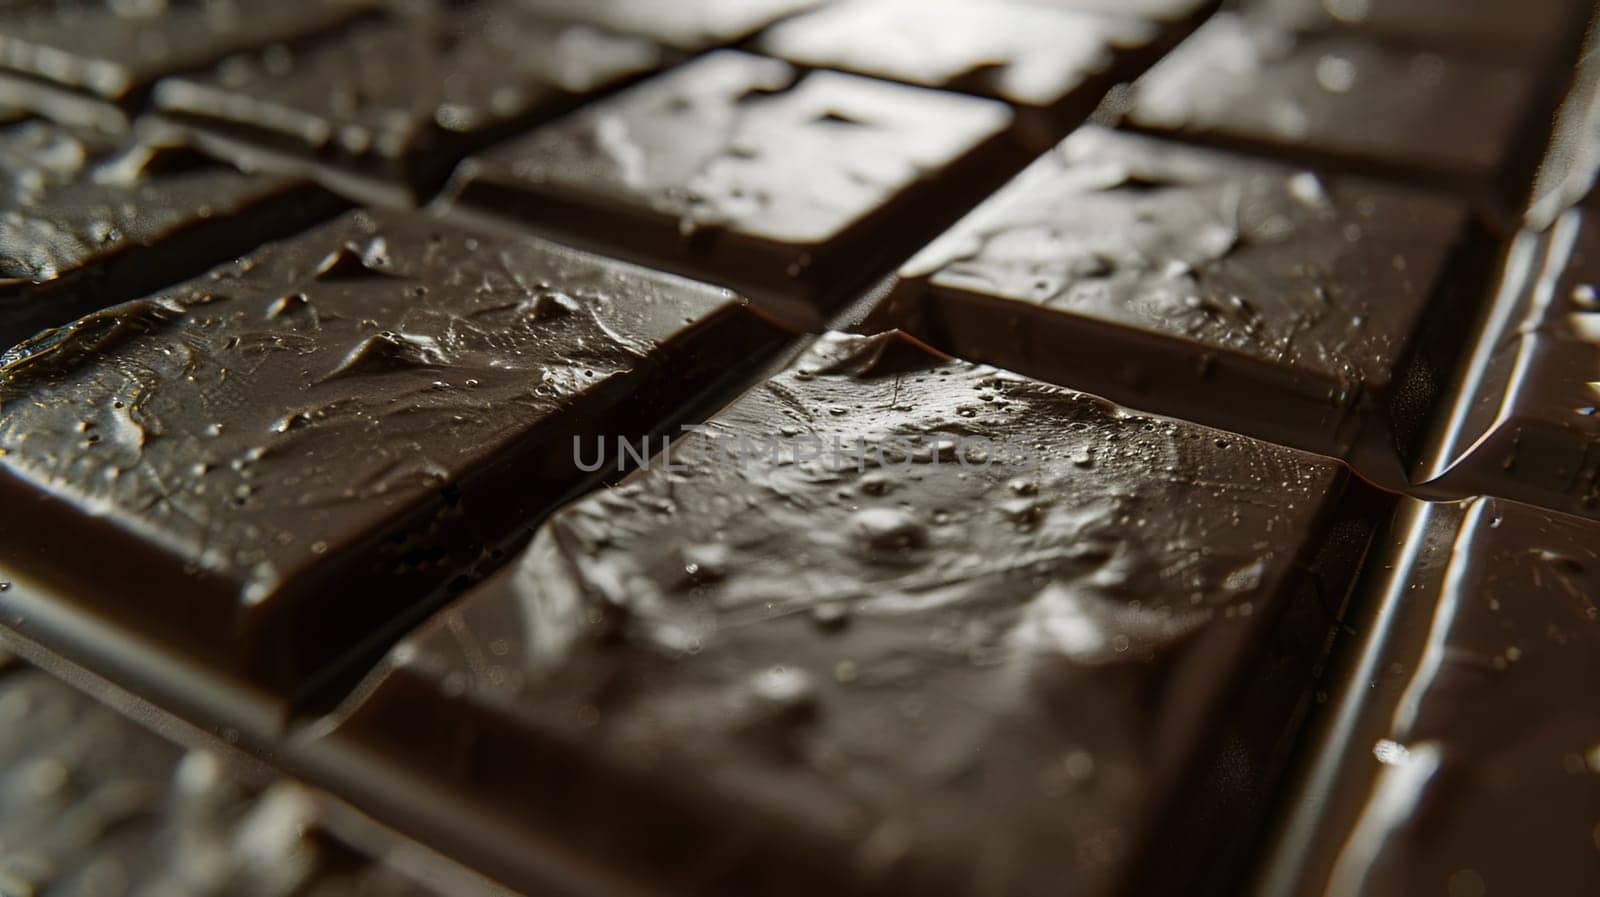 Close-up of a dark chocolate bar with water droplets, showcasing break lines and a smooth, even surface.